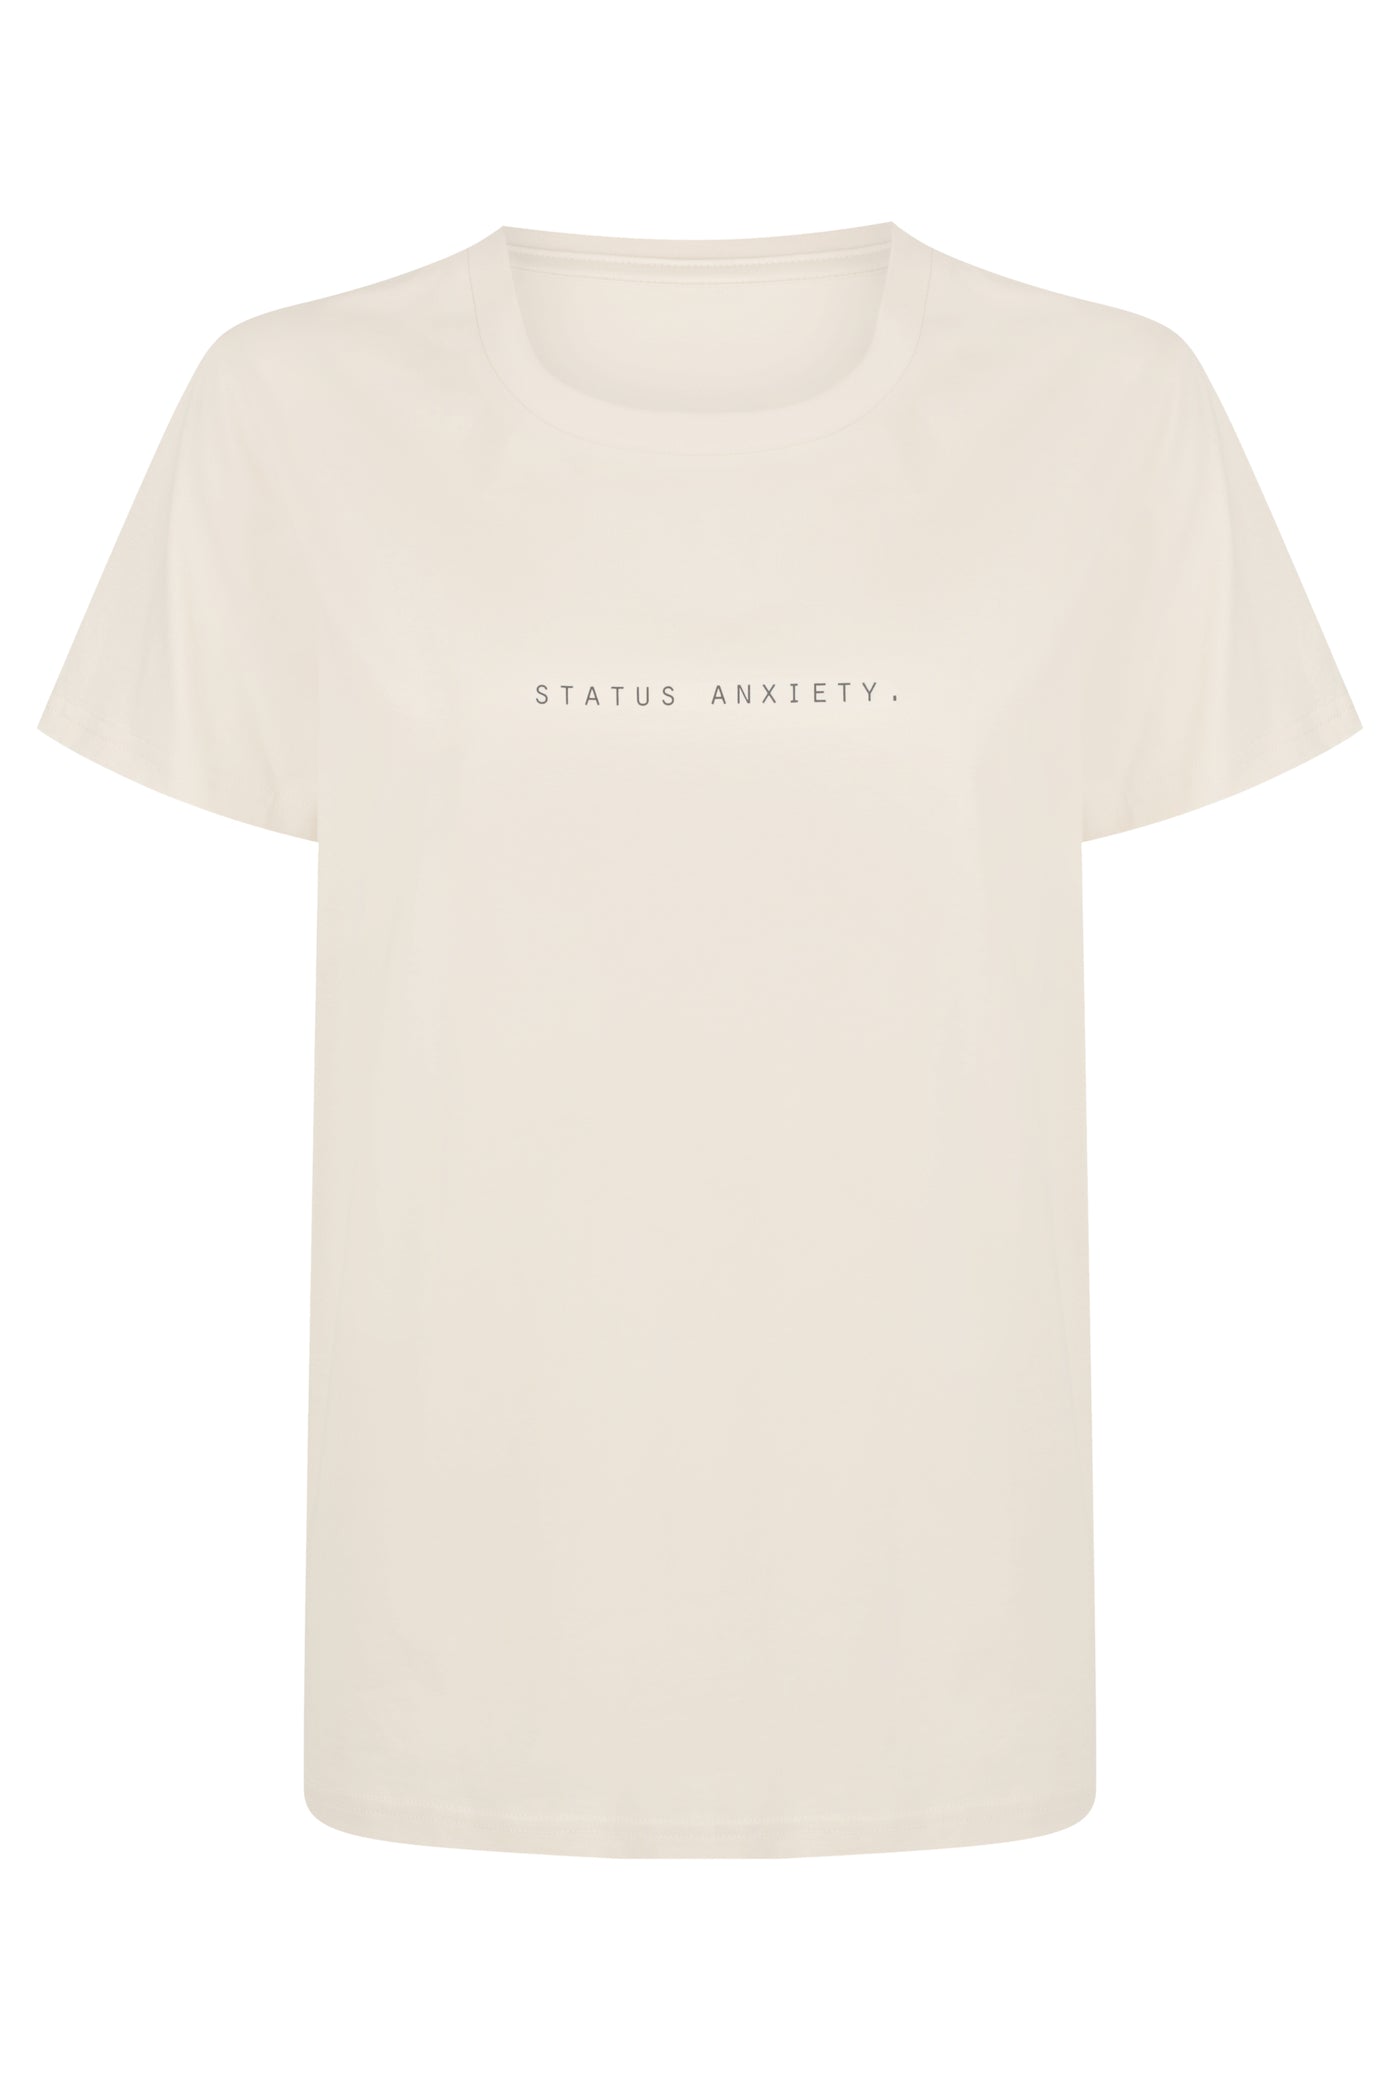 STATUS ANXIETY THINK IT OVER TEE  The Status Anxiety Think It Over Tee is an essential wardrobe staple no matter the season; wear it alone or layered. 